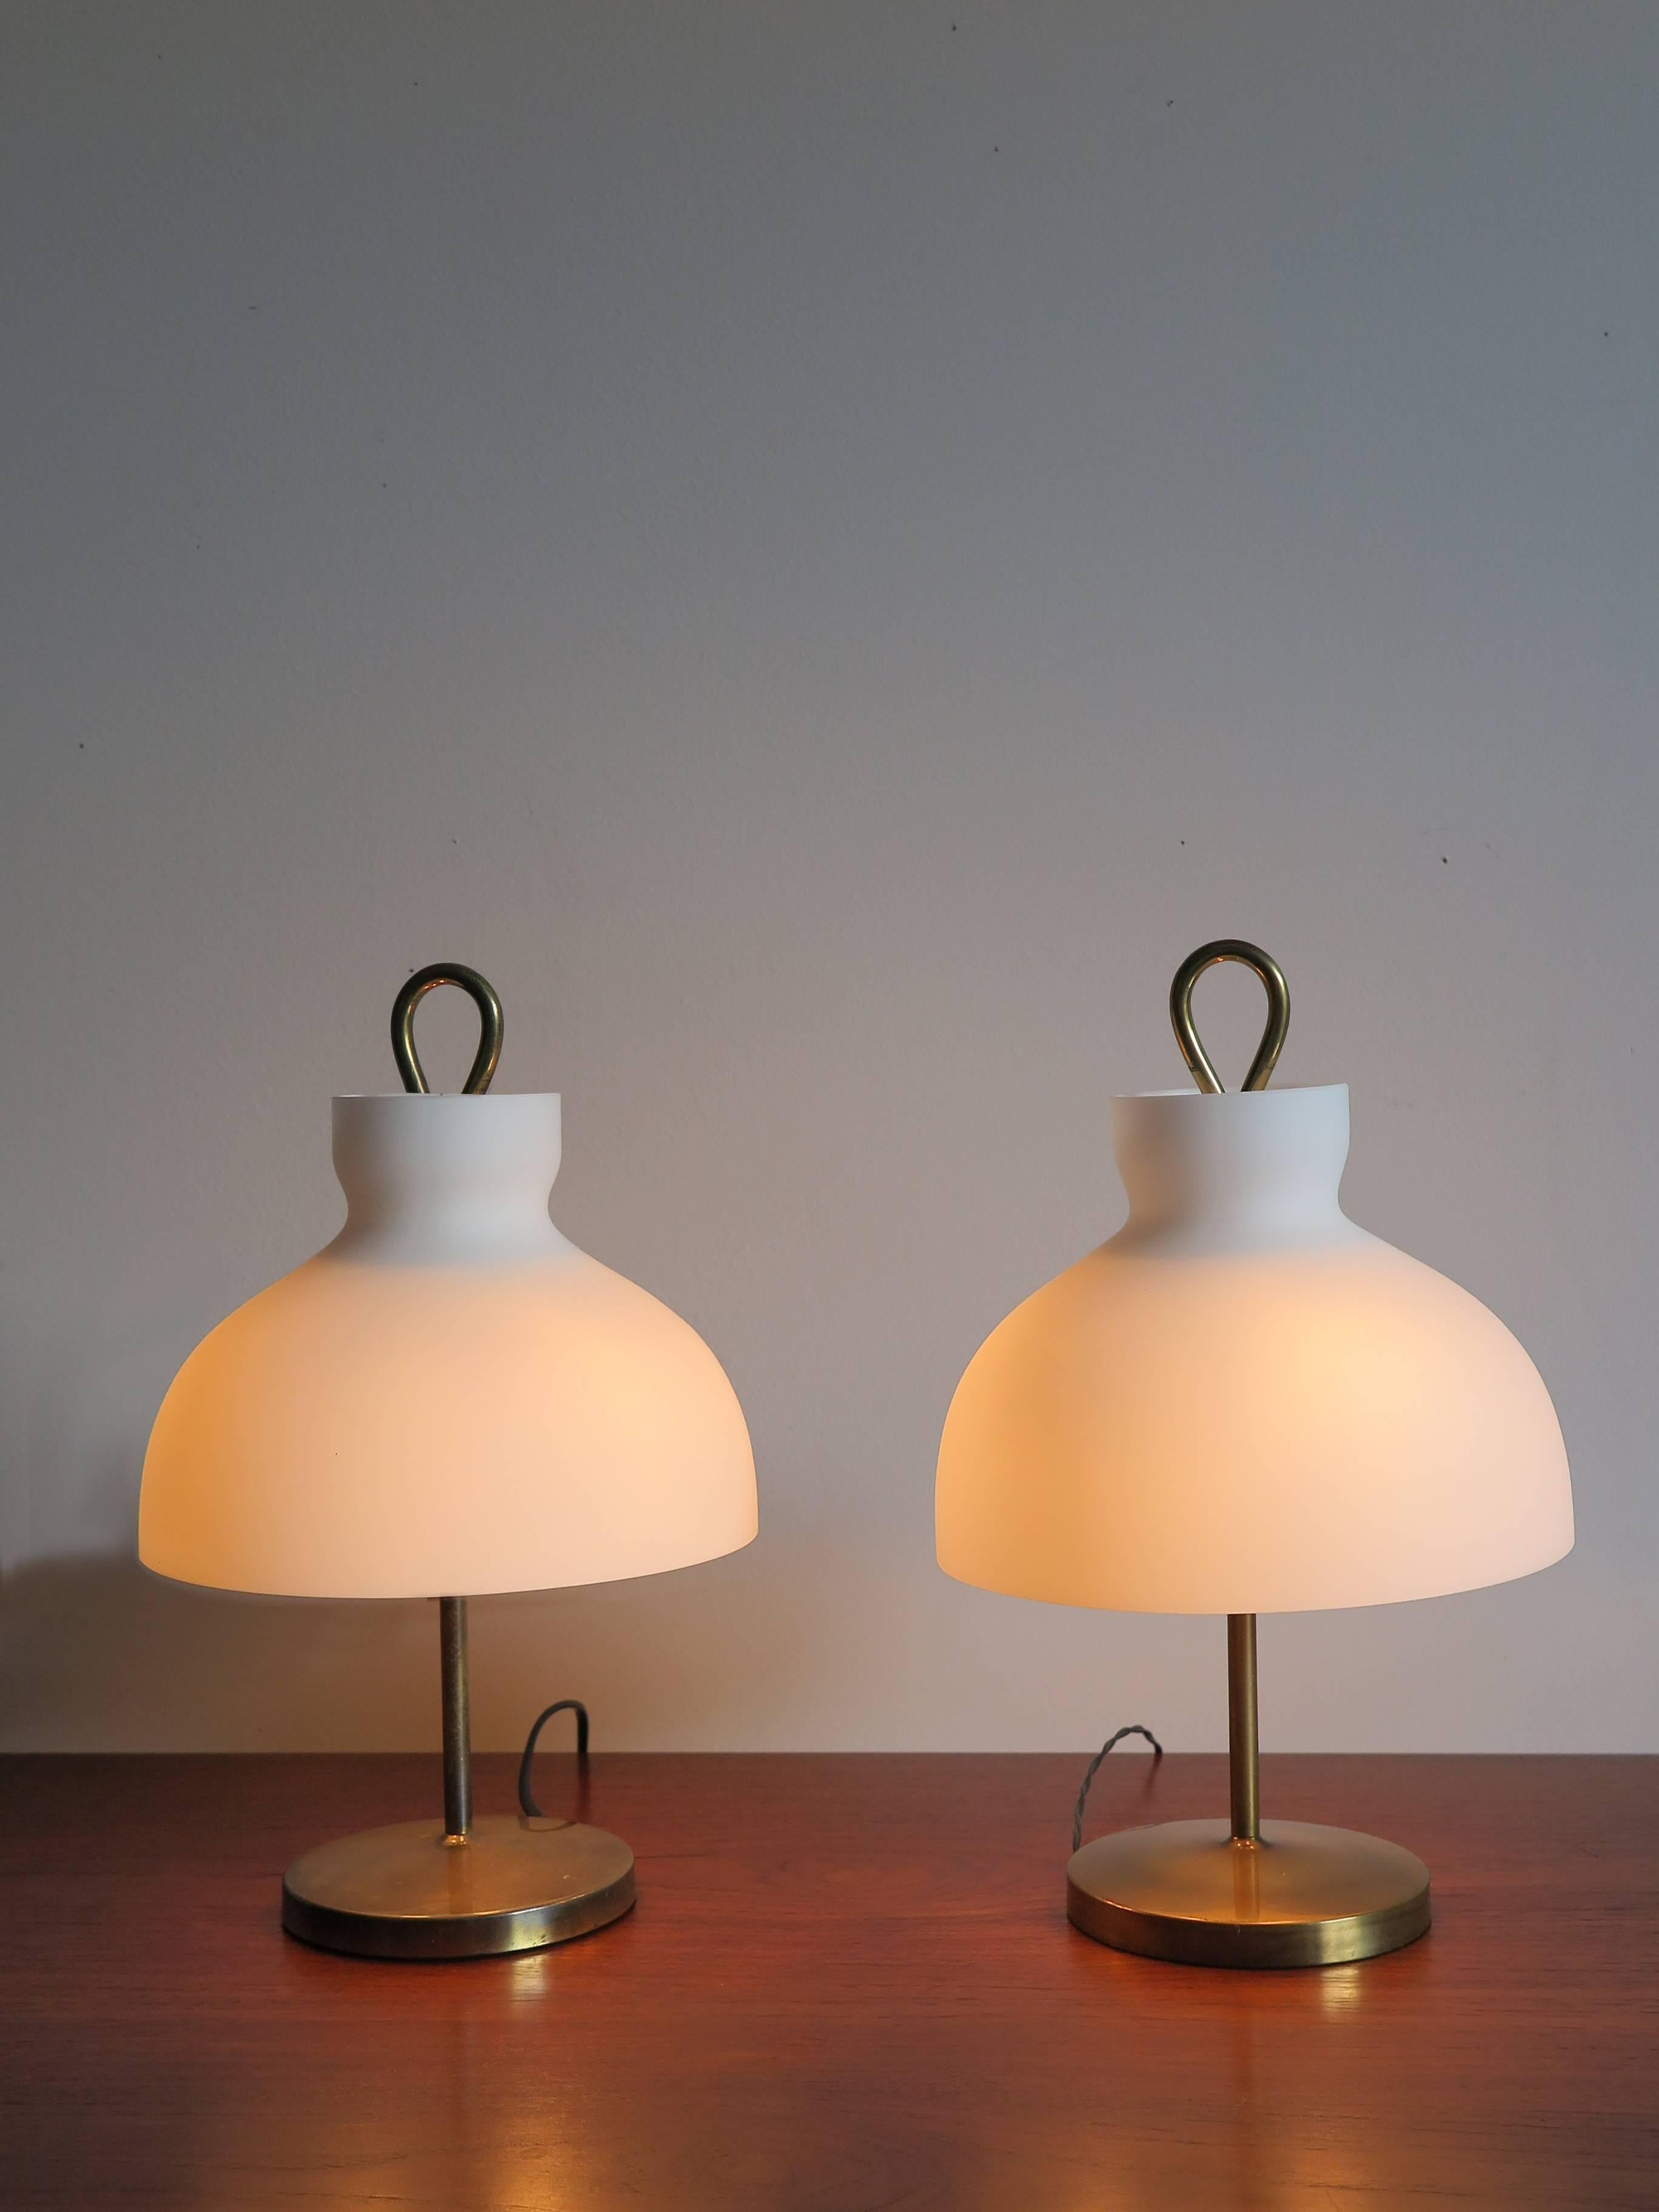 Couple of Italian table lamps model Arenzano designed by Ignazio Gardella for Azucena in 1956, no chips or scratches in the glass white shades and normal vintage patina in the brass structures, midcentury design.